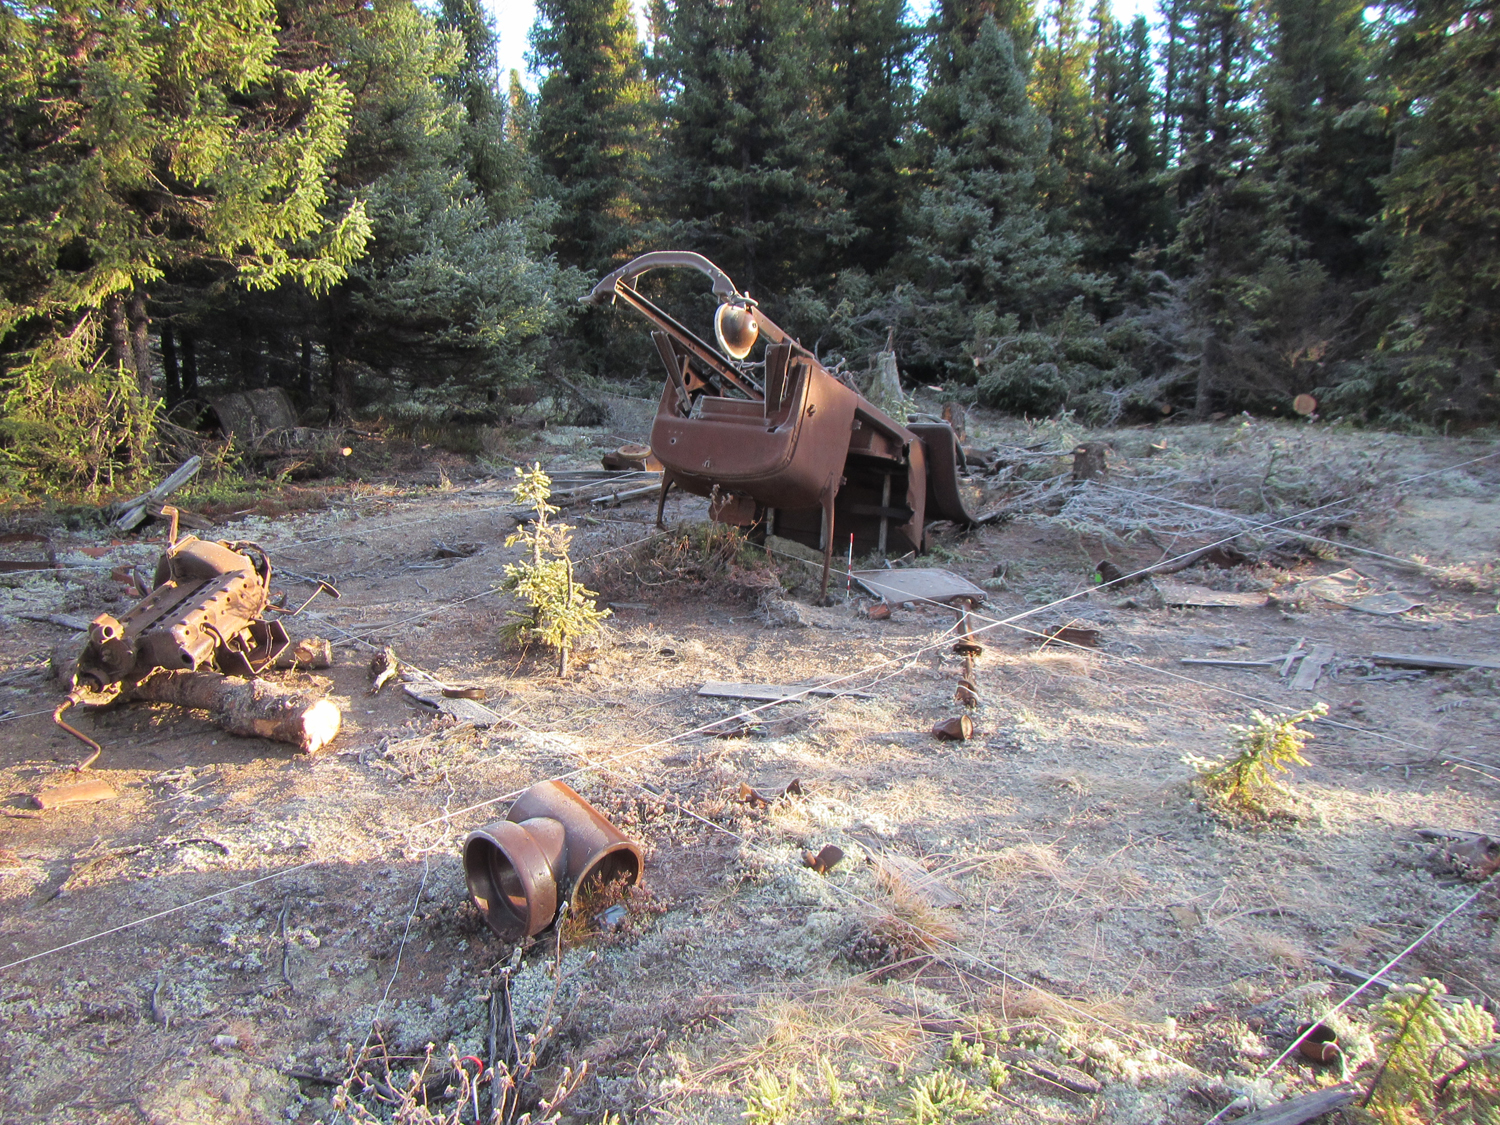 The snowmobile – a converted Ford Model T – was unearthed in Labrador several years ago. 